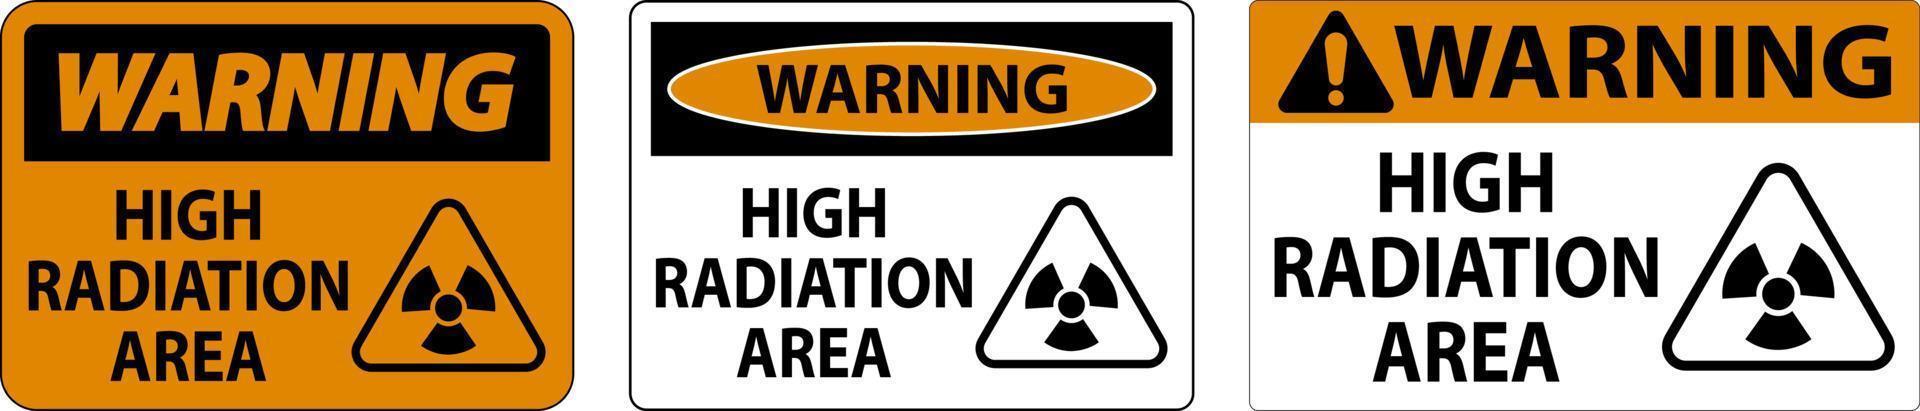 Warning High Radiation Area Sign On White Background vector